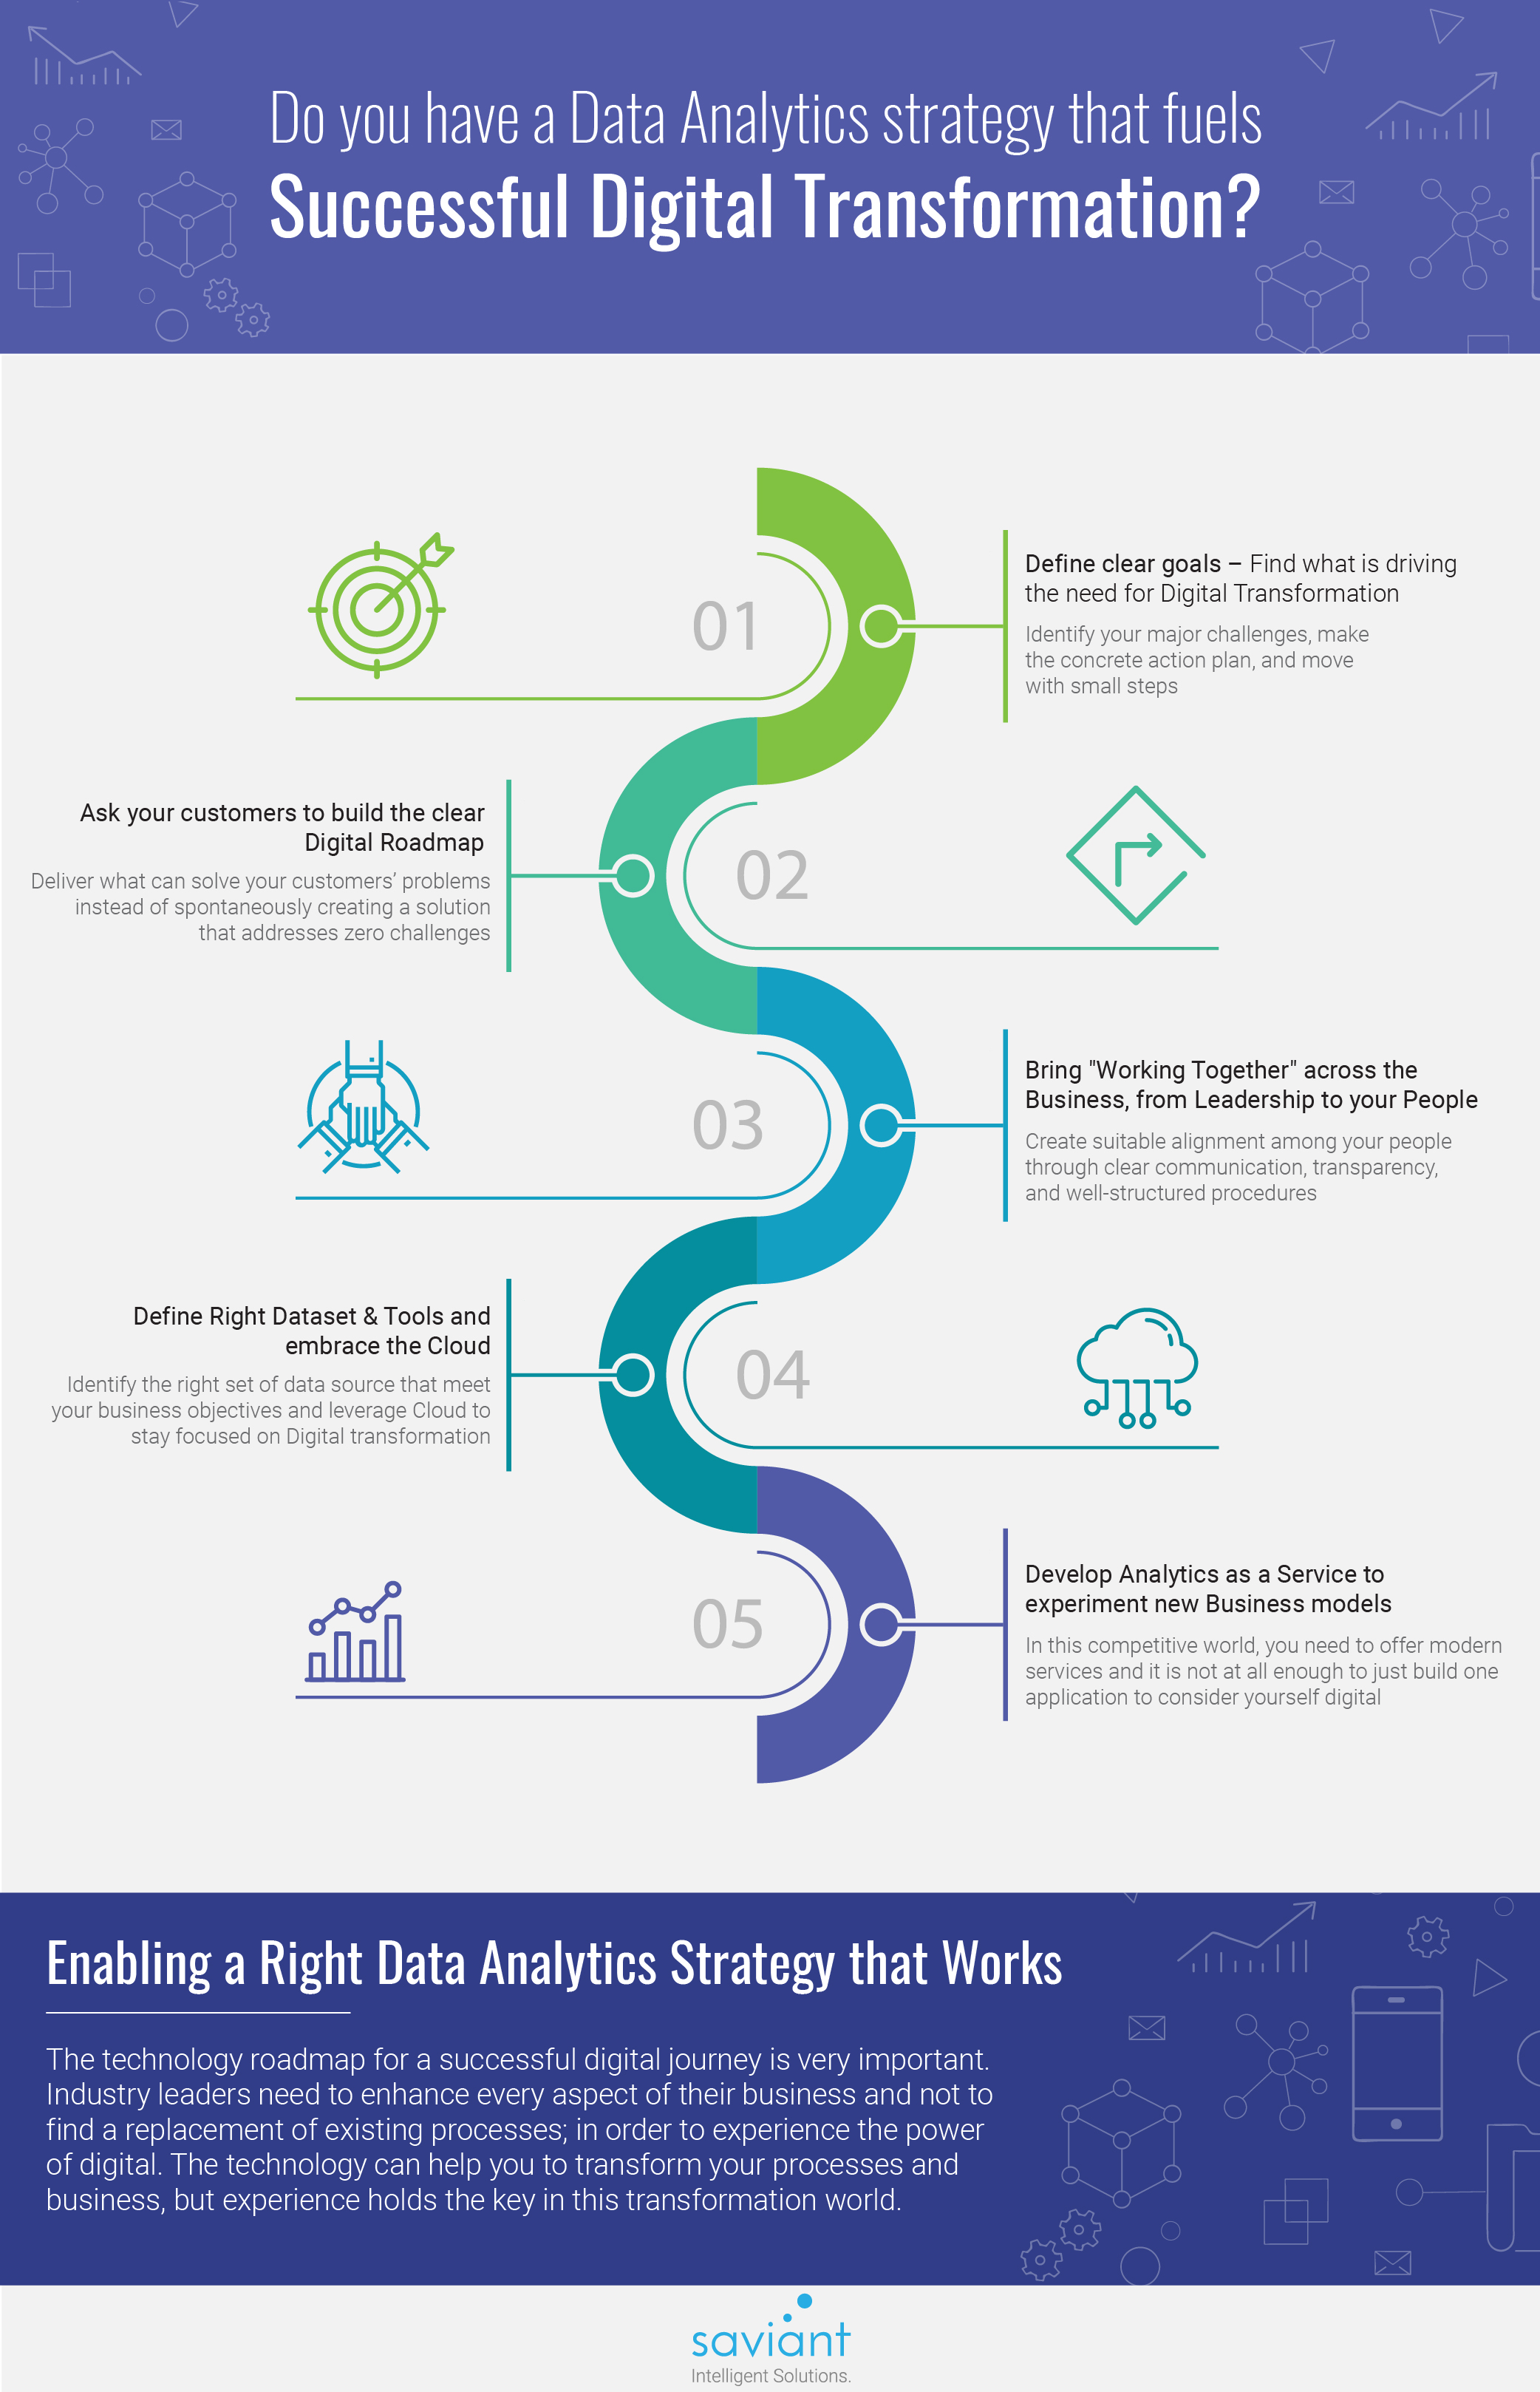 Data Analytics Strategy for Digital Transformation Infographic